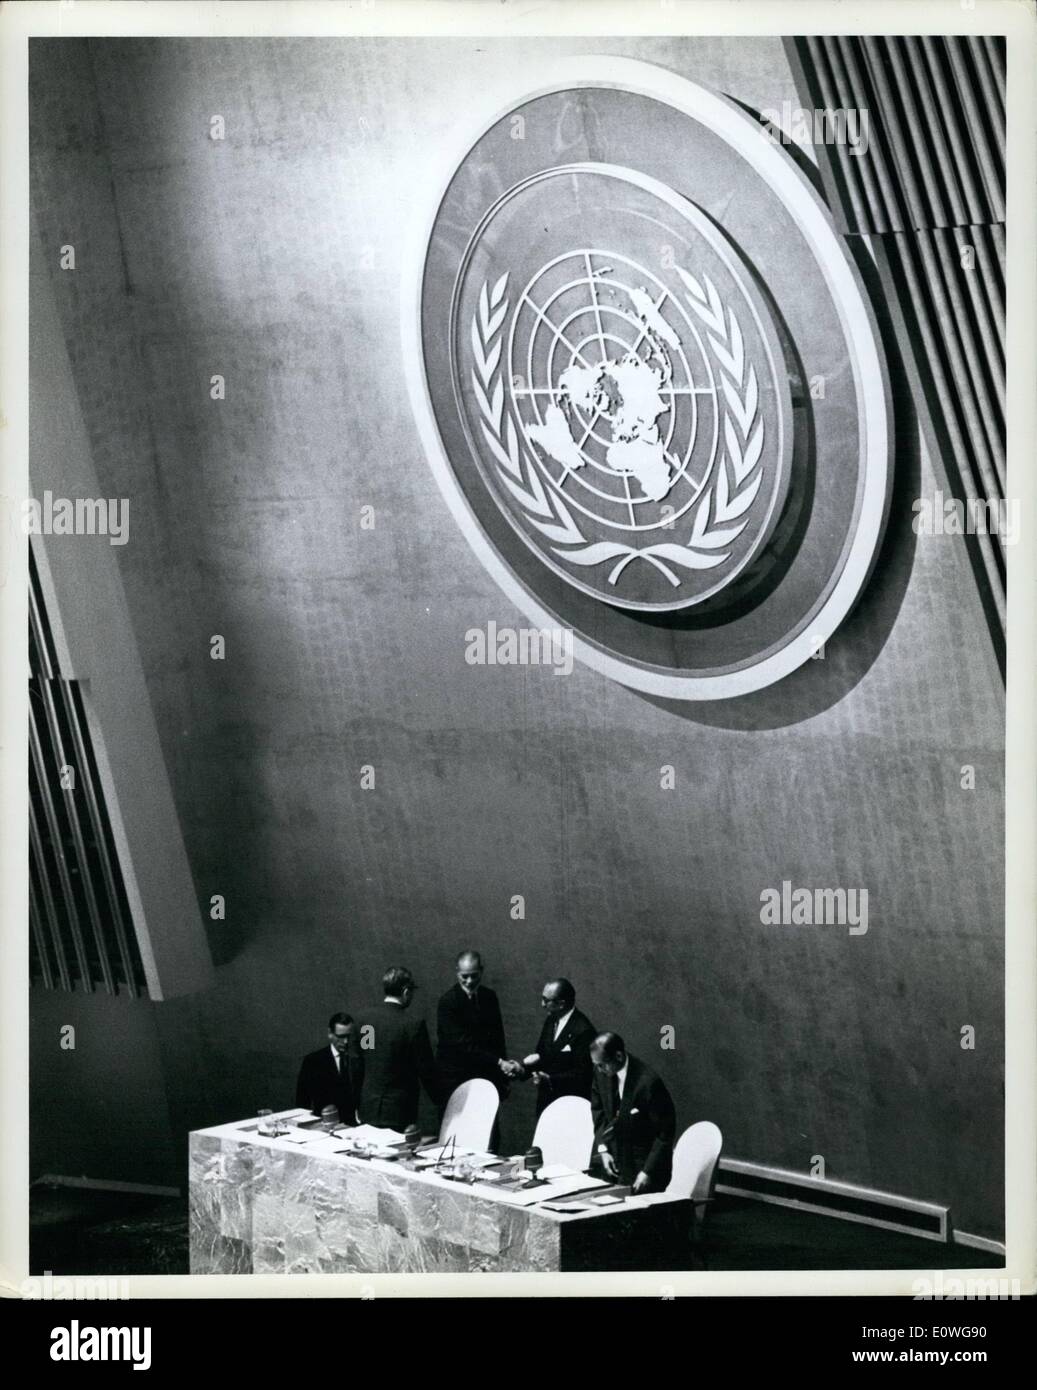 Sep. 09, 1962 - U.N. General Assembly Opens Seventeenth Regular Session United Nations NY THe Seventheenth Regular Session of the Genral Assembly opened this afternoon at United Nations Headquarters, and elected as its President ambassador Muhammad Zafrulla Khan, of Pakistan, the result of the balloting was 72 votes for Ambassador Khan, 27 votes for Prof G.P. Malalasekera (Caylon), one vote for Mr Mongi Slim (Tunisia) and 4 invalid ballots. There were no abatentions Stock Photo